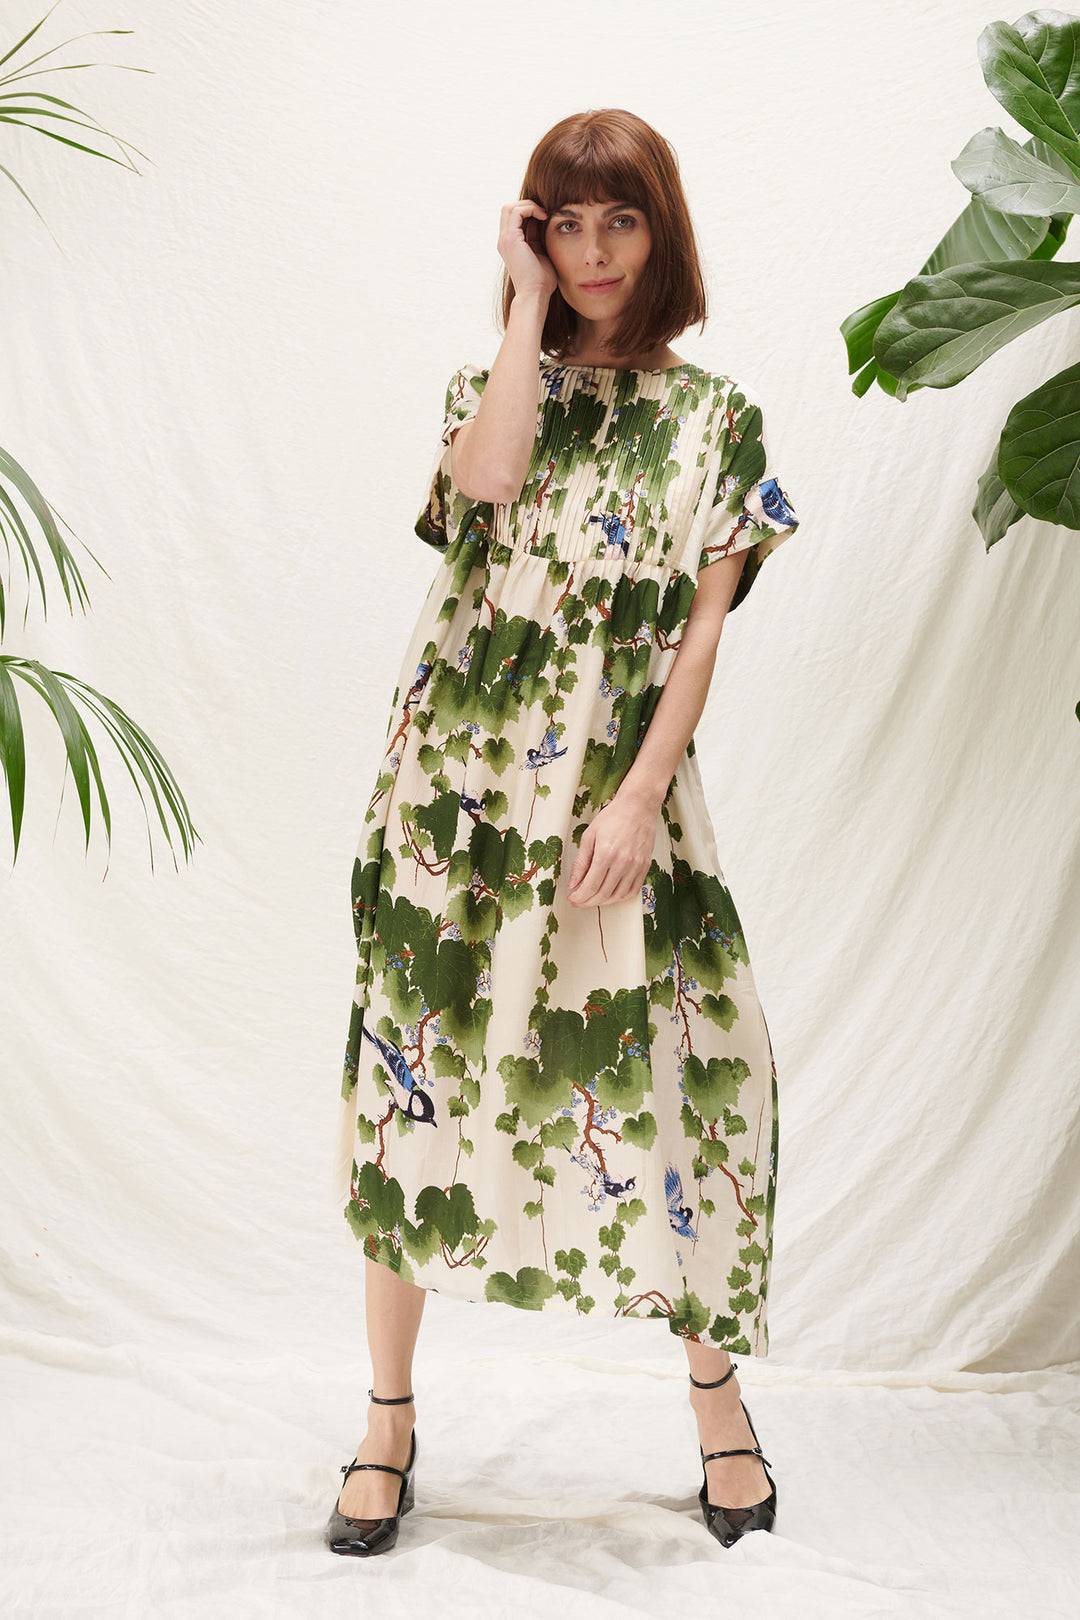 Acer green pleat dress by one hundred stars